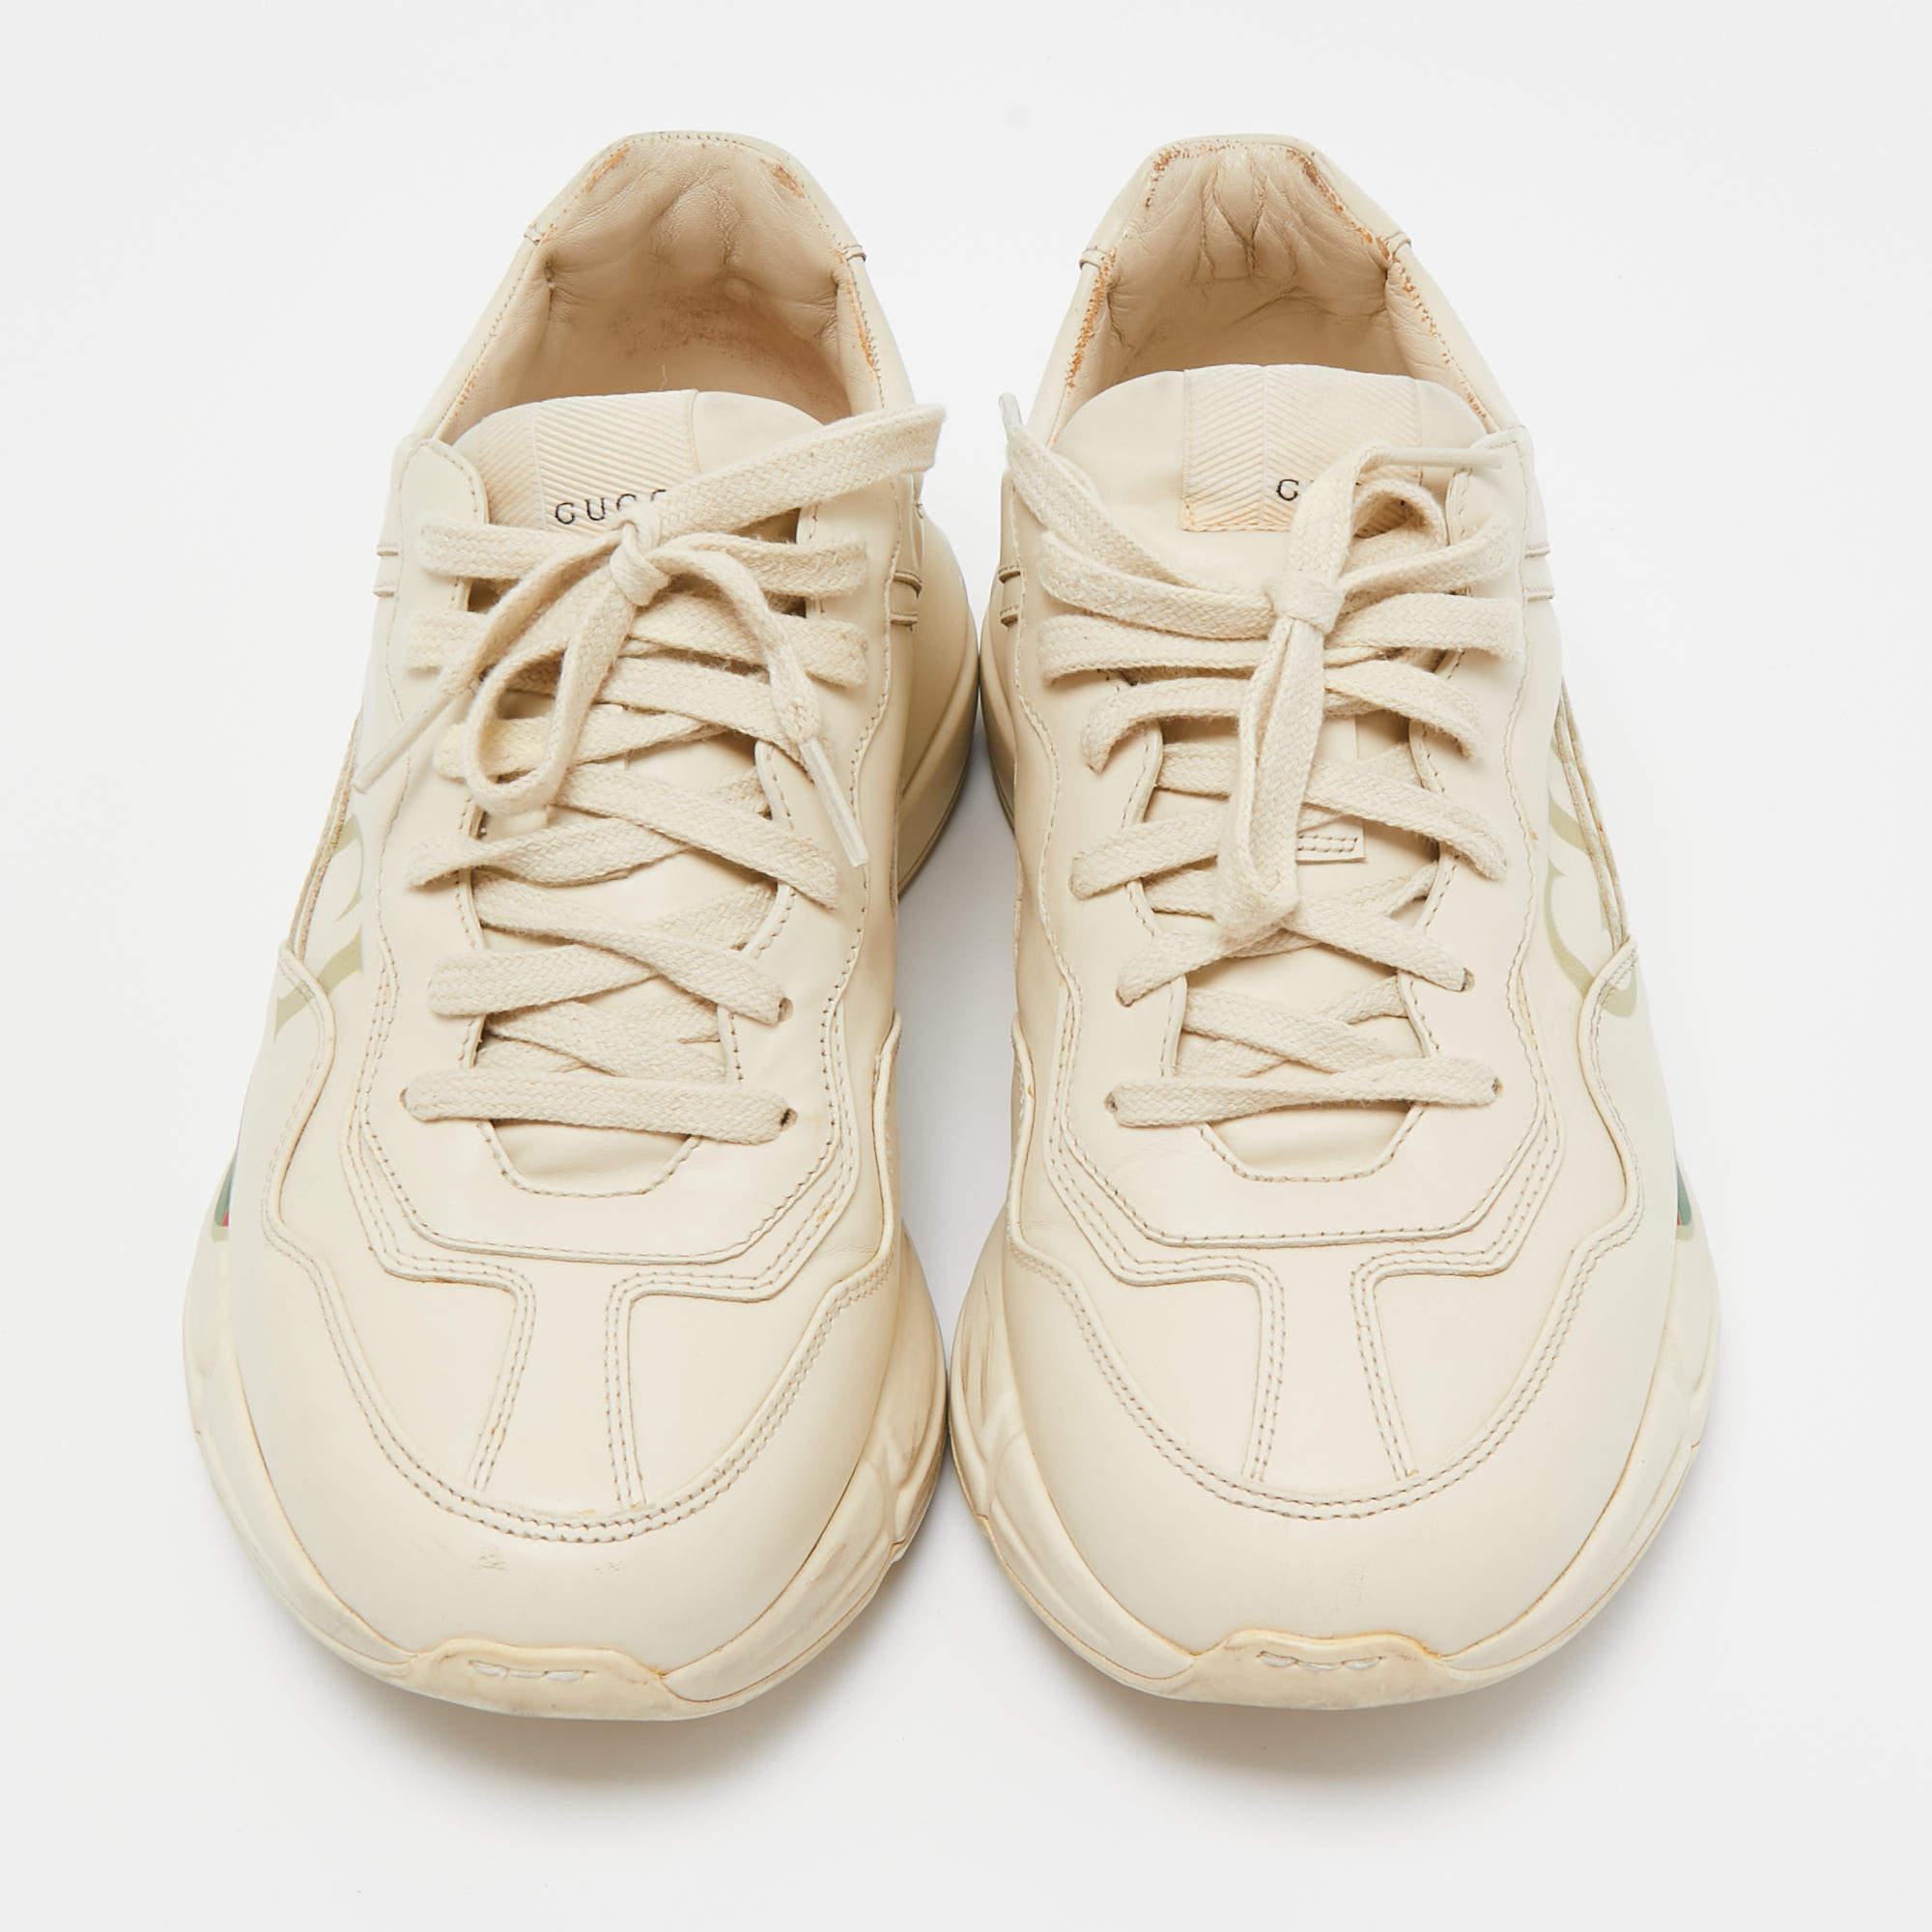 Women's Gucci Cream Leather Rhyton Low Top Sneakers Size 40.5